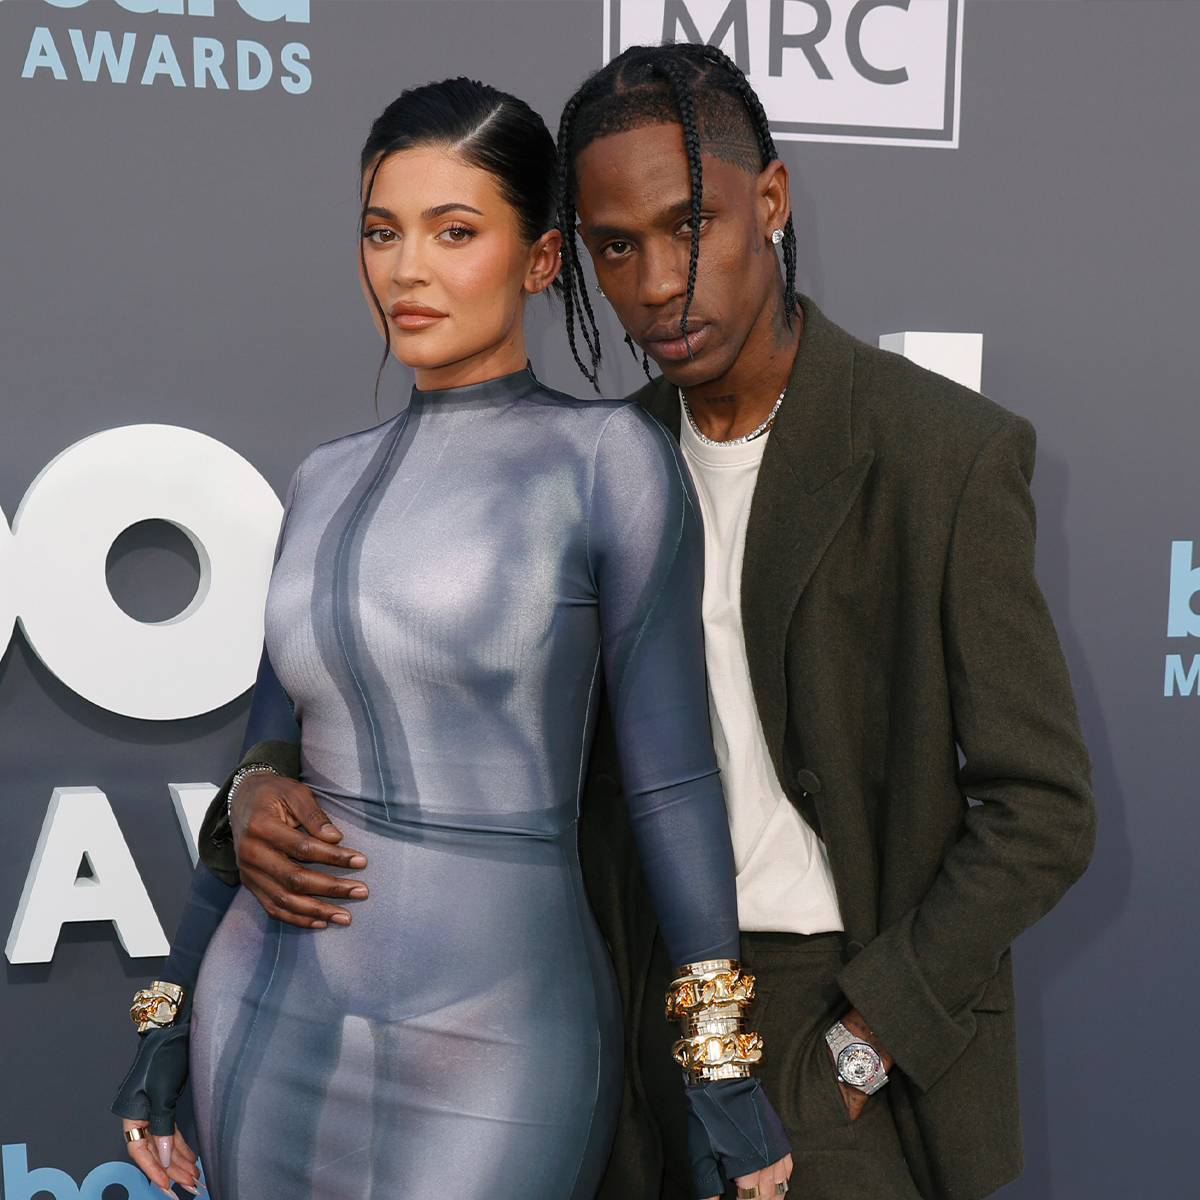 Kylie Jenner Shares Father’s Day Pic of Son With Travis Scott & Stormi